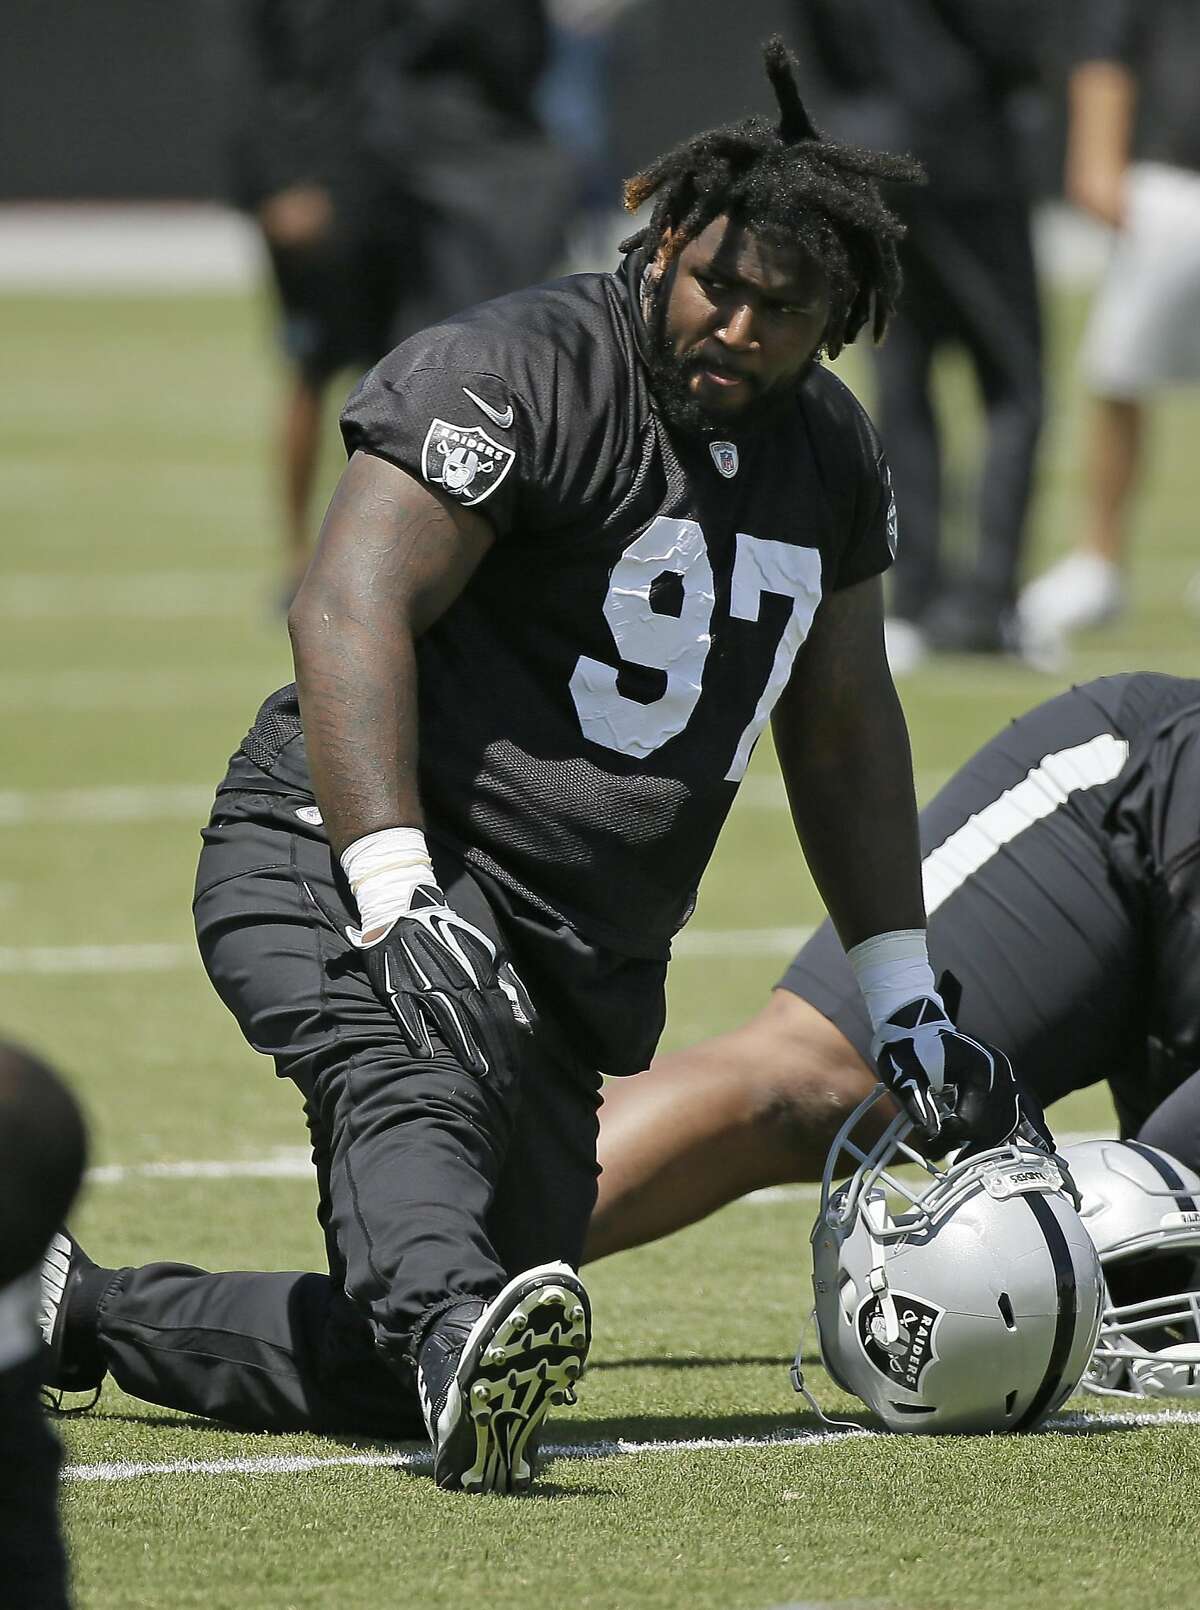 Oakland Raiders defensive end Mario Edwards stretches during their football minicamp Tuesday, June 14, 2016, in Alameda, Calif. (AP Photo/Eric Risberg)